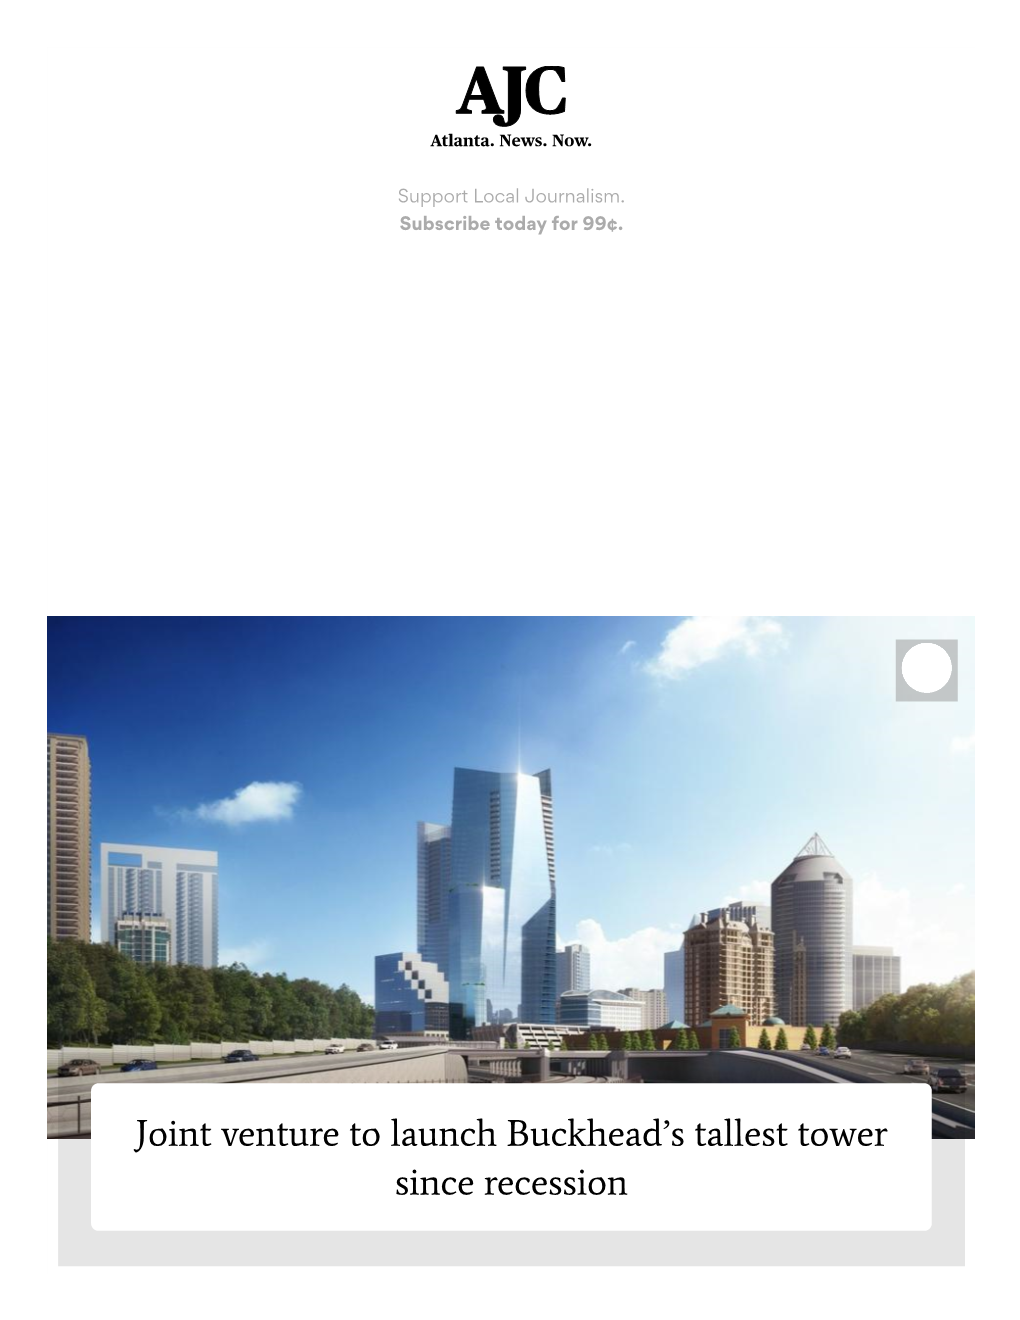 Joint Venture to Launch Buckhead's Tallest Tower Since Recession